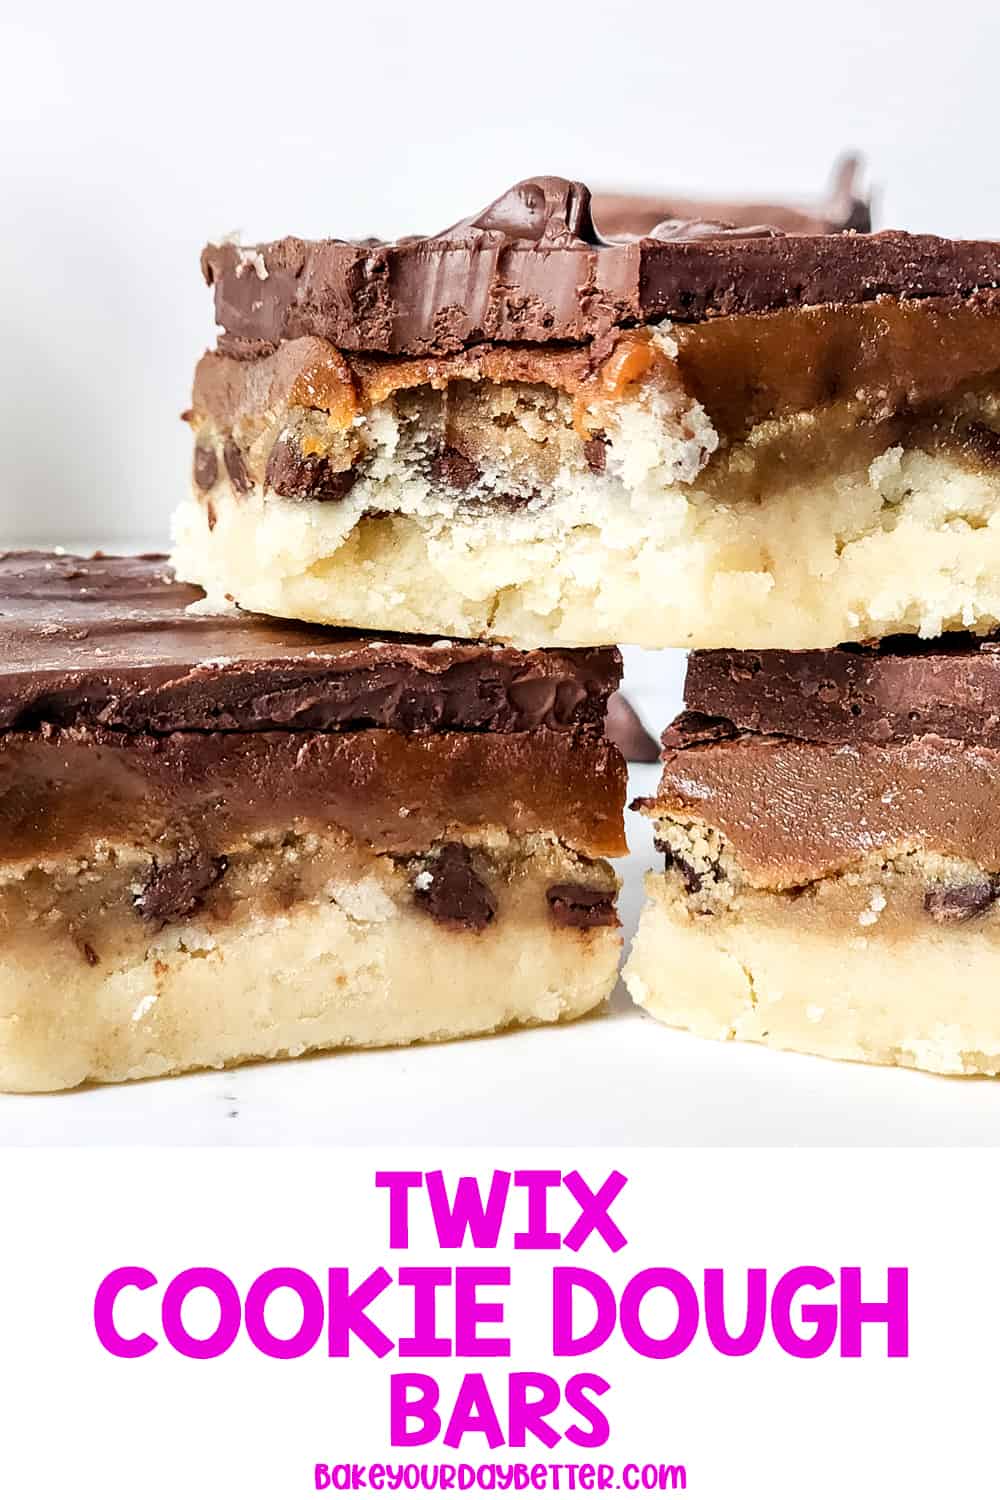 twix cookie dough bars (text overlay under stack of finished twix bars)